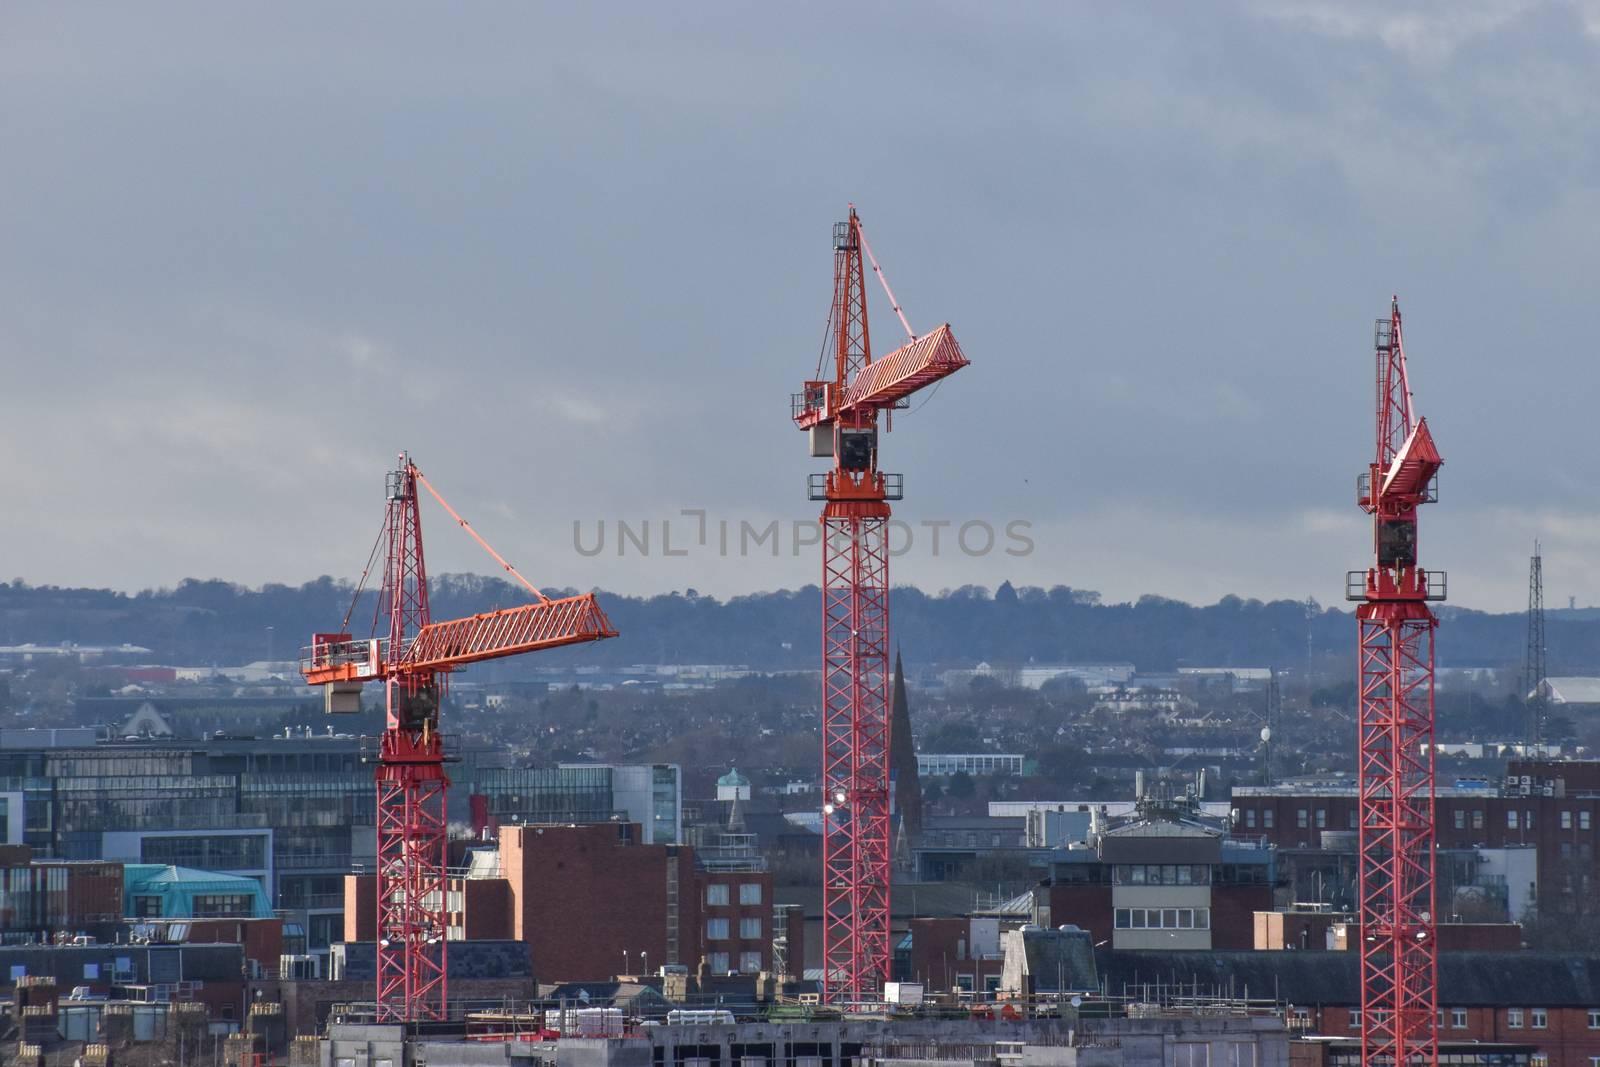 Three construction cranes set against a city skyline on a winters day